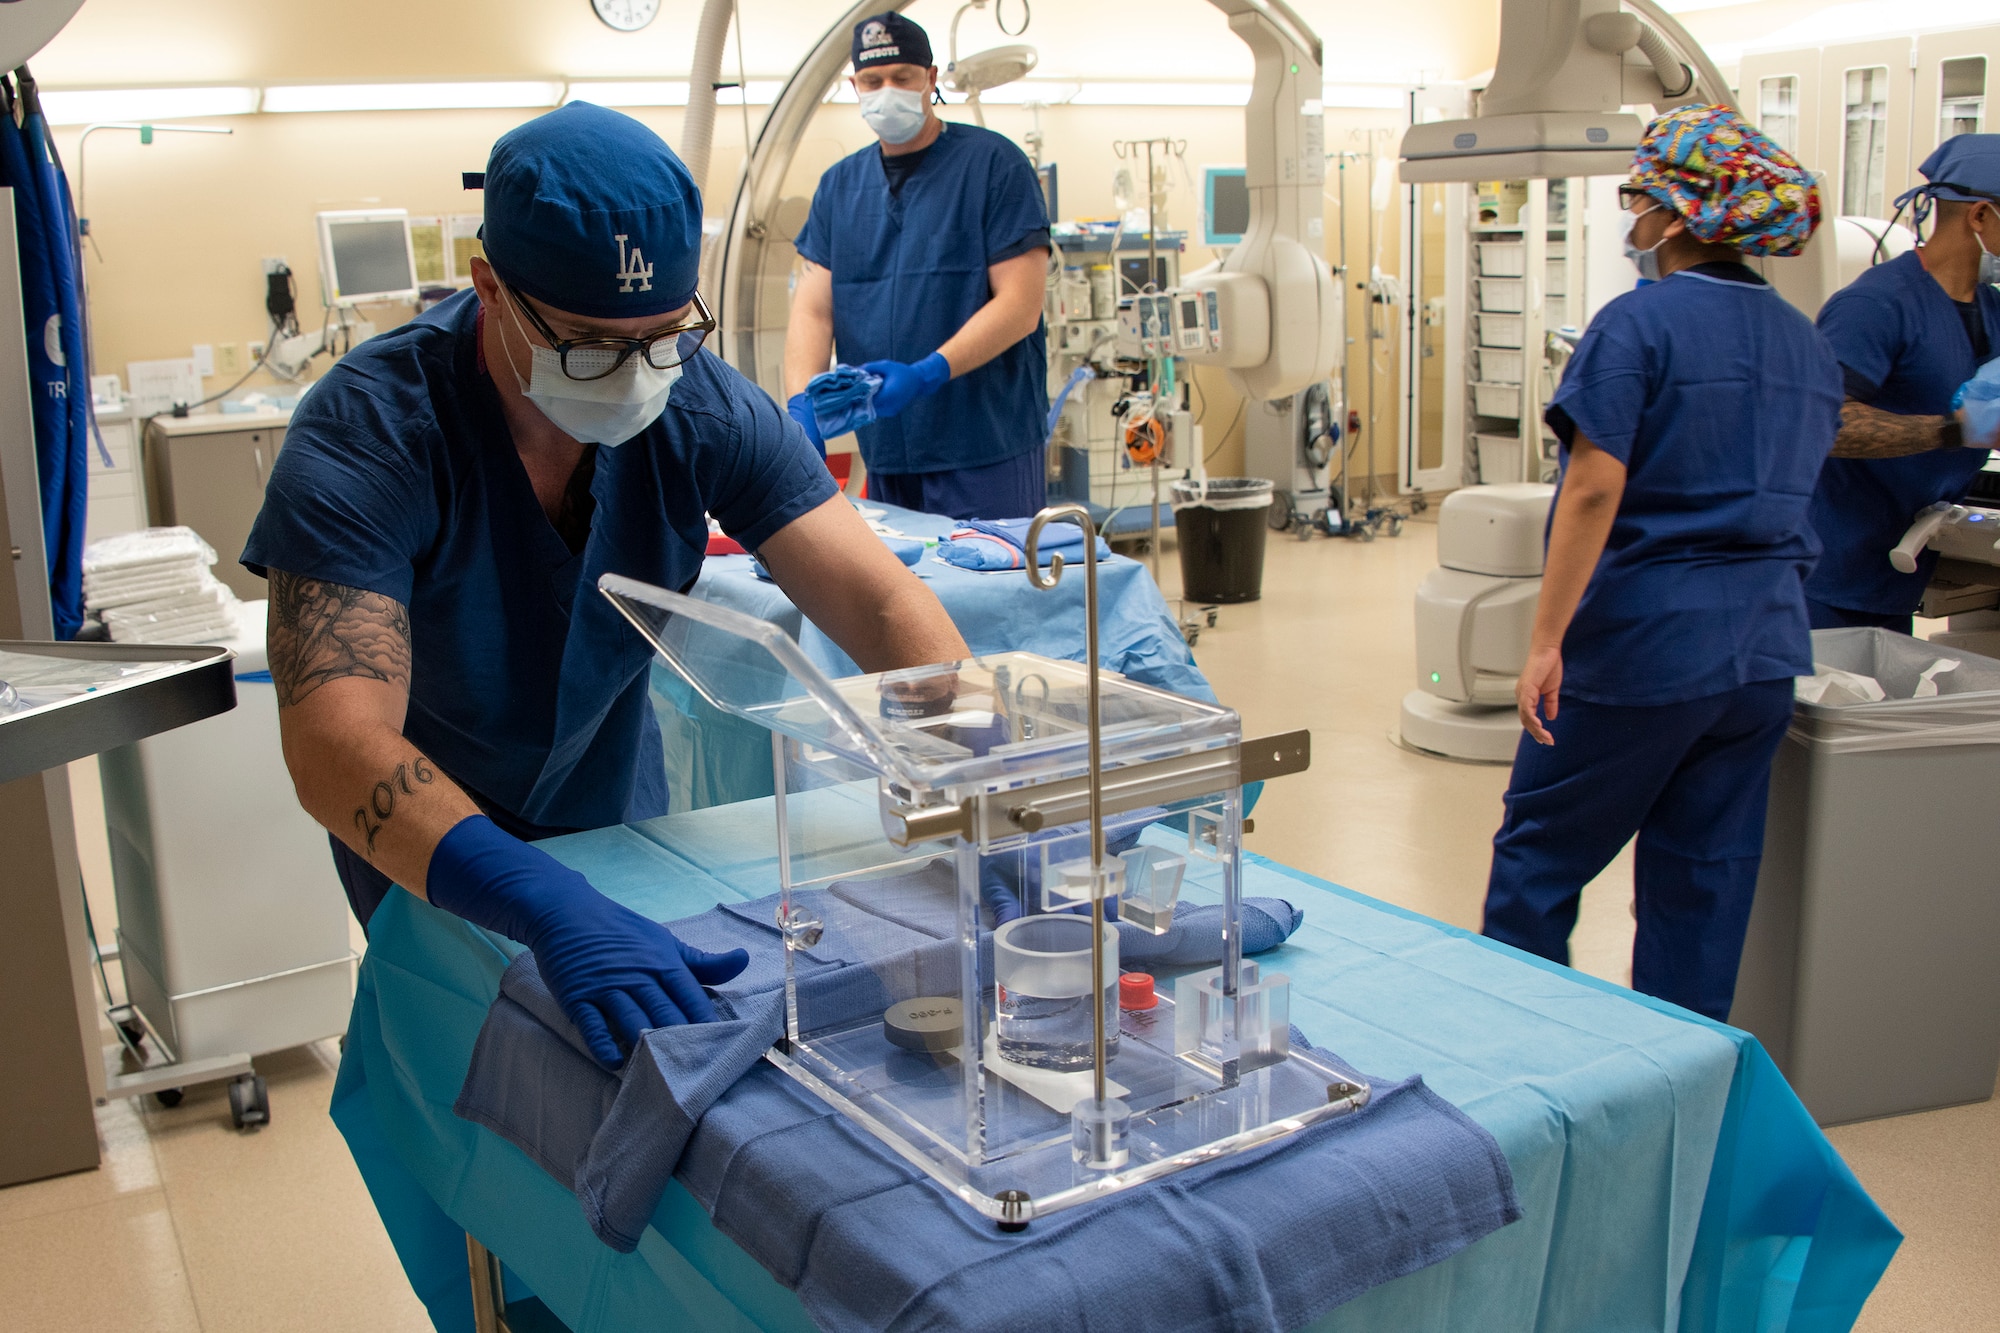 U.S. Air Force Senior Airman Justin Ritzel, 60th Diagnostics and Therapeutics Squadron, prepares a tray of specialized medical equipment ahead of an Yttrium-90 radioembolization procedure for a patient with liver cancer Sept. 7, 2018, atTravis Air Force Base, Calif. The Y-90 radioembolization is an advanced and minimally invasive method utilized to treat cancer by delivering millions of tiny radioactive beads inside the blood vessels that feed a tumor. The high dose of targeted radiation prospectively kills the tumor while sparing normal tissue. This was the first time the treatment was performed at David Grant USAF Medical Center. (U.S. Air Force photo by Heide Couch)